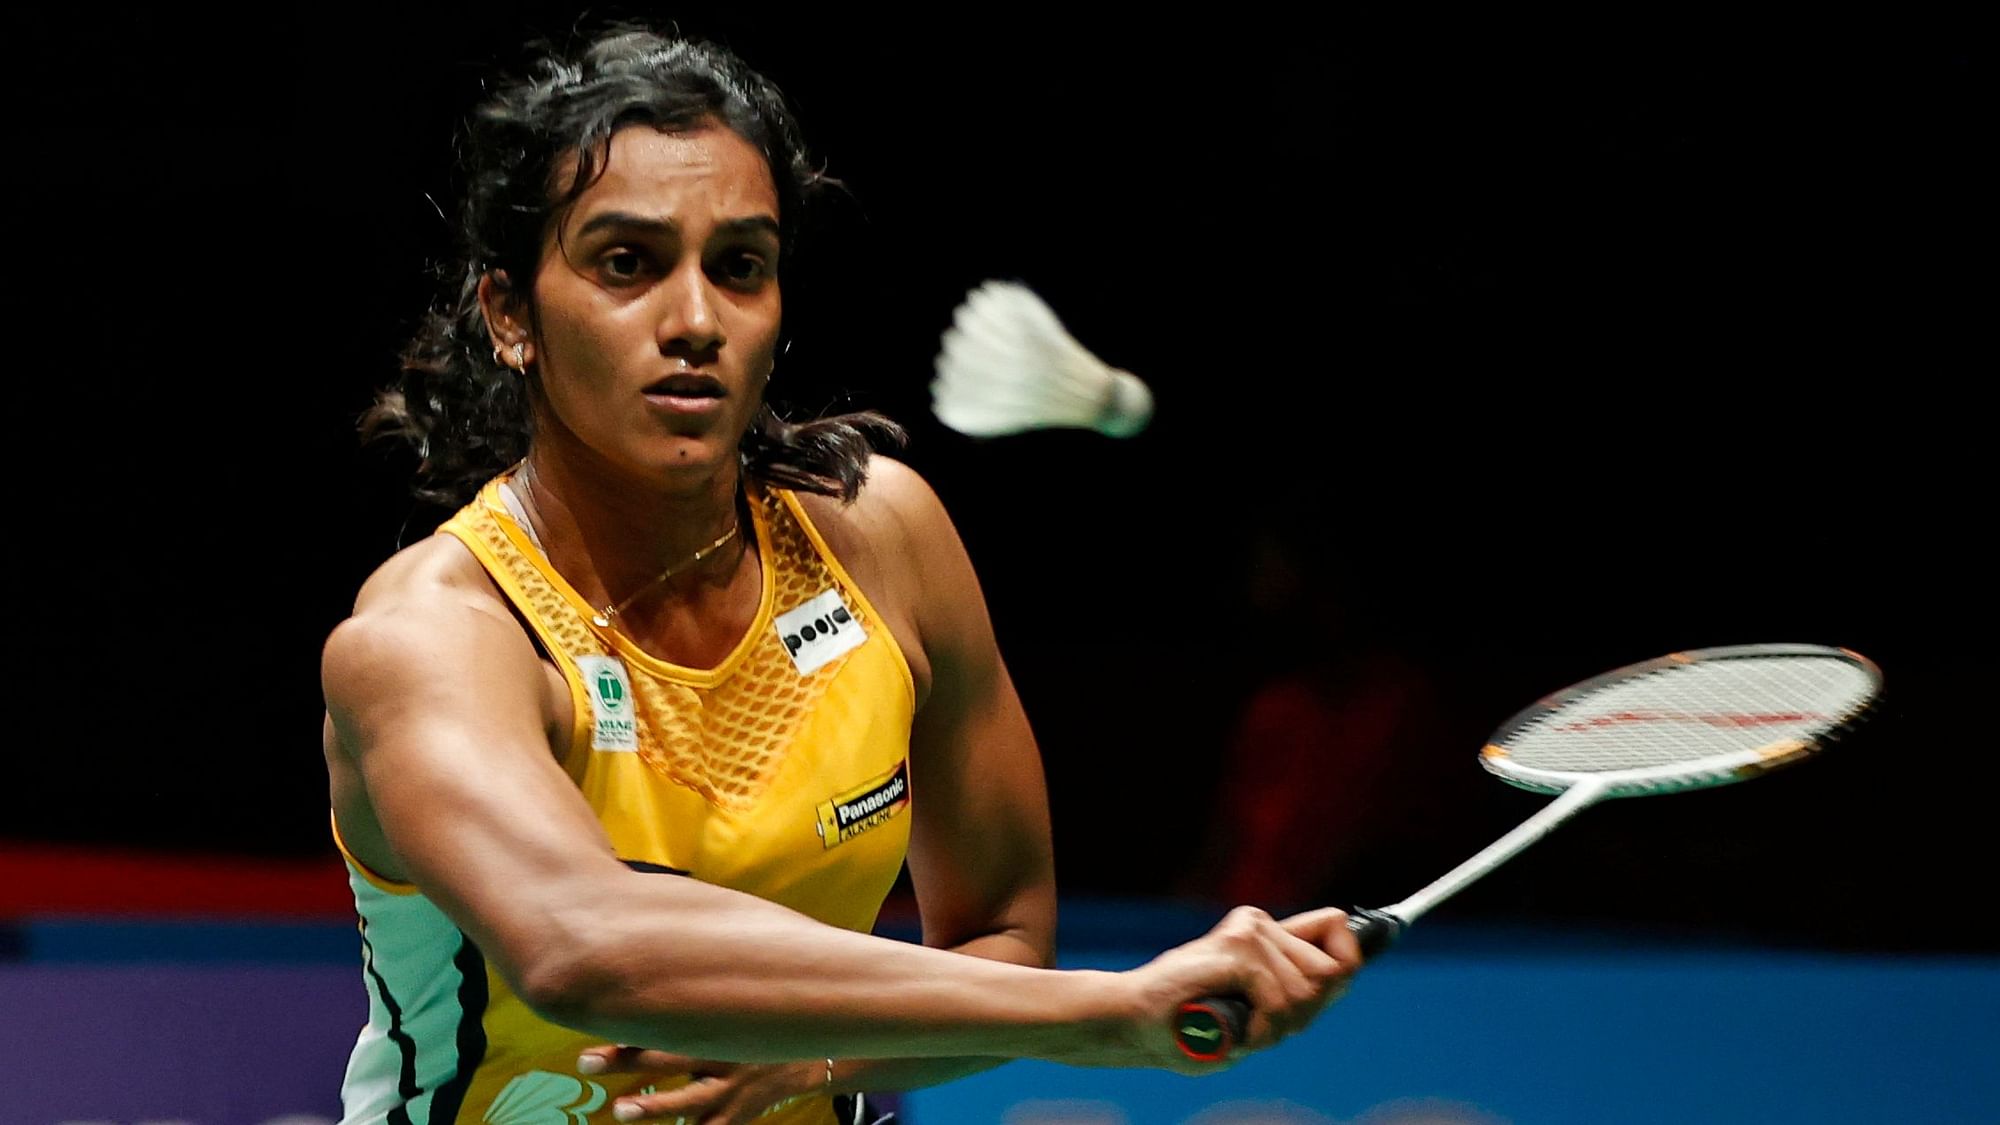 This will be the second consecutive season with Hyderabad Hunters for Rio Olympic silver medallist PV Sindhu in the Premier Badminton League.